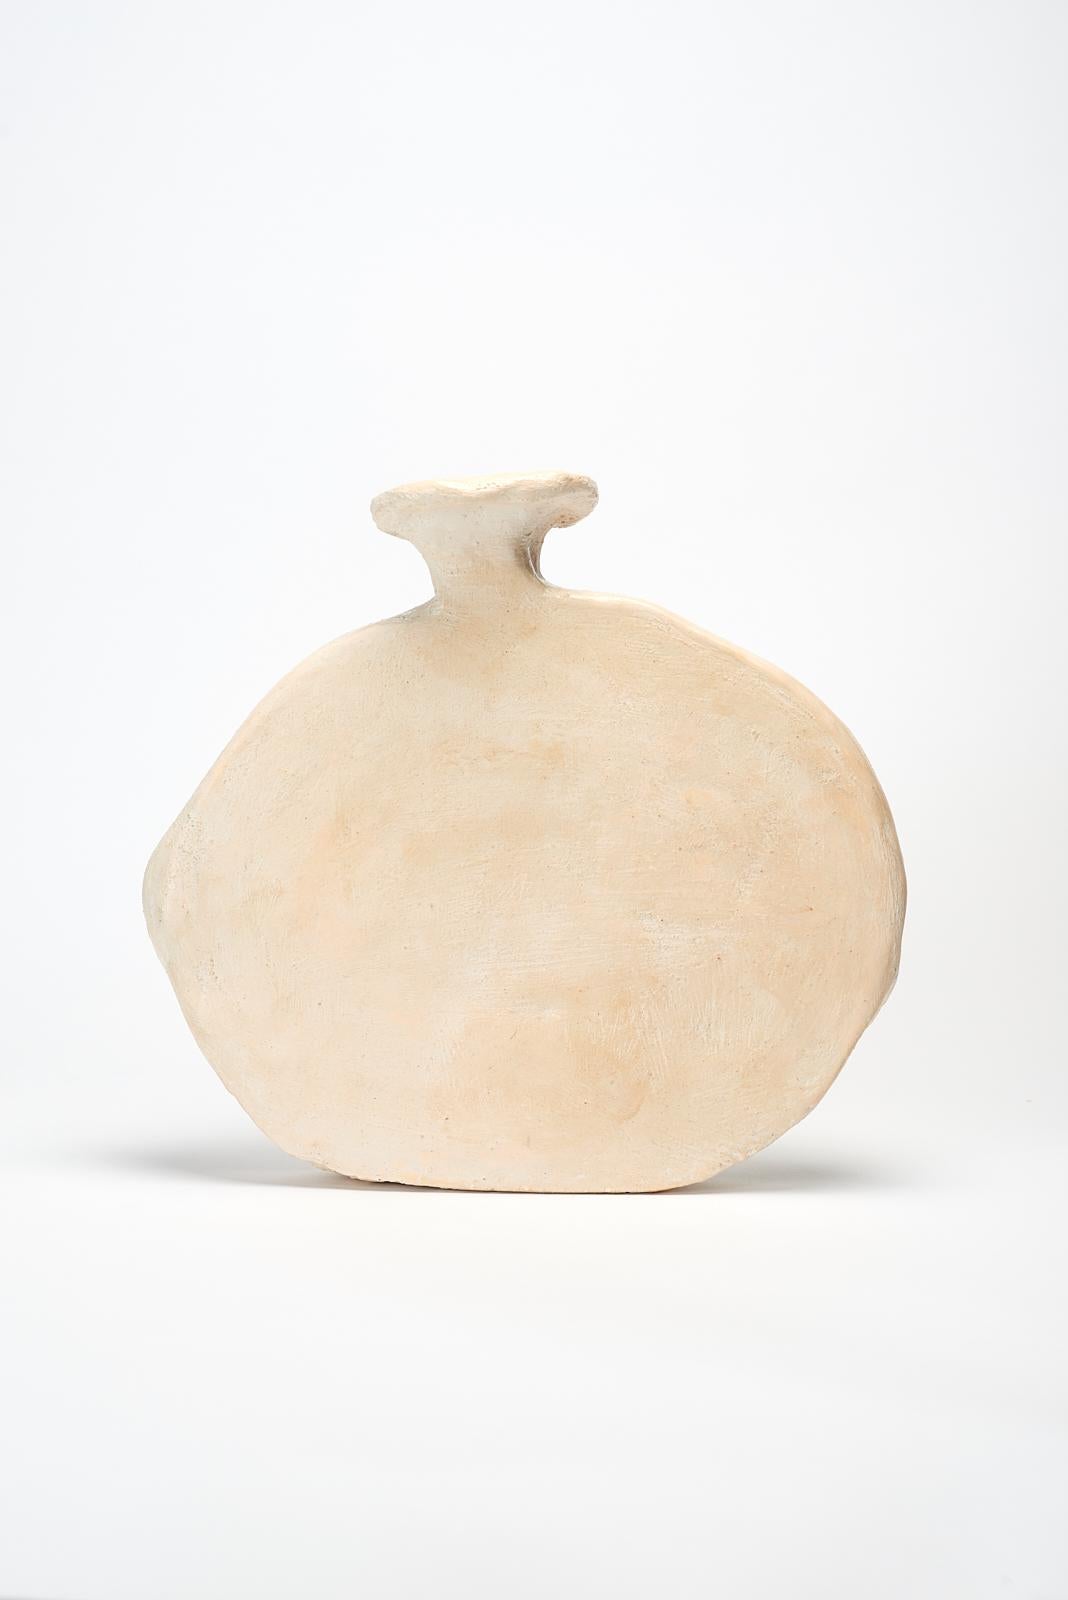 Bica Vase by Willem Van Hooff
Core Vessel Series
Dimensions: W 36 x H 30 cm (Dimensions may vary as pieces are hand-made and might present slight variations in sizes)
Materials: Earthenware, ceramic, pigments, glaze

Core is a series of flat vessels